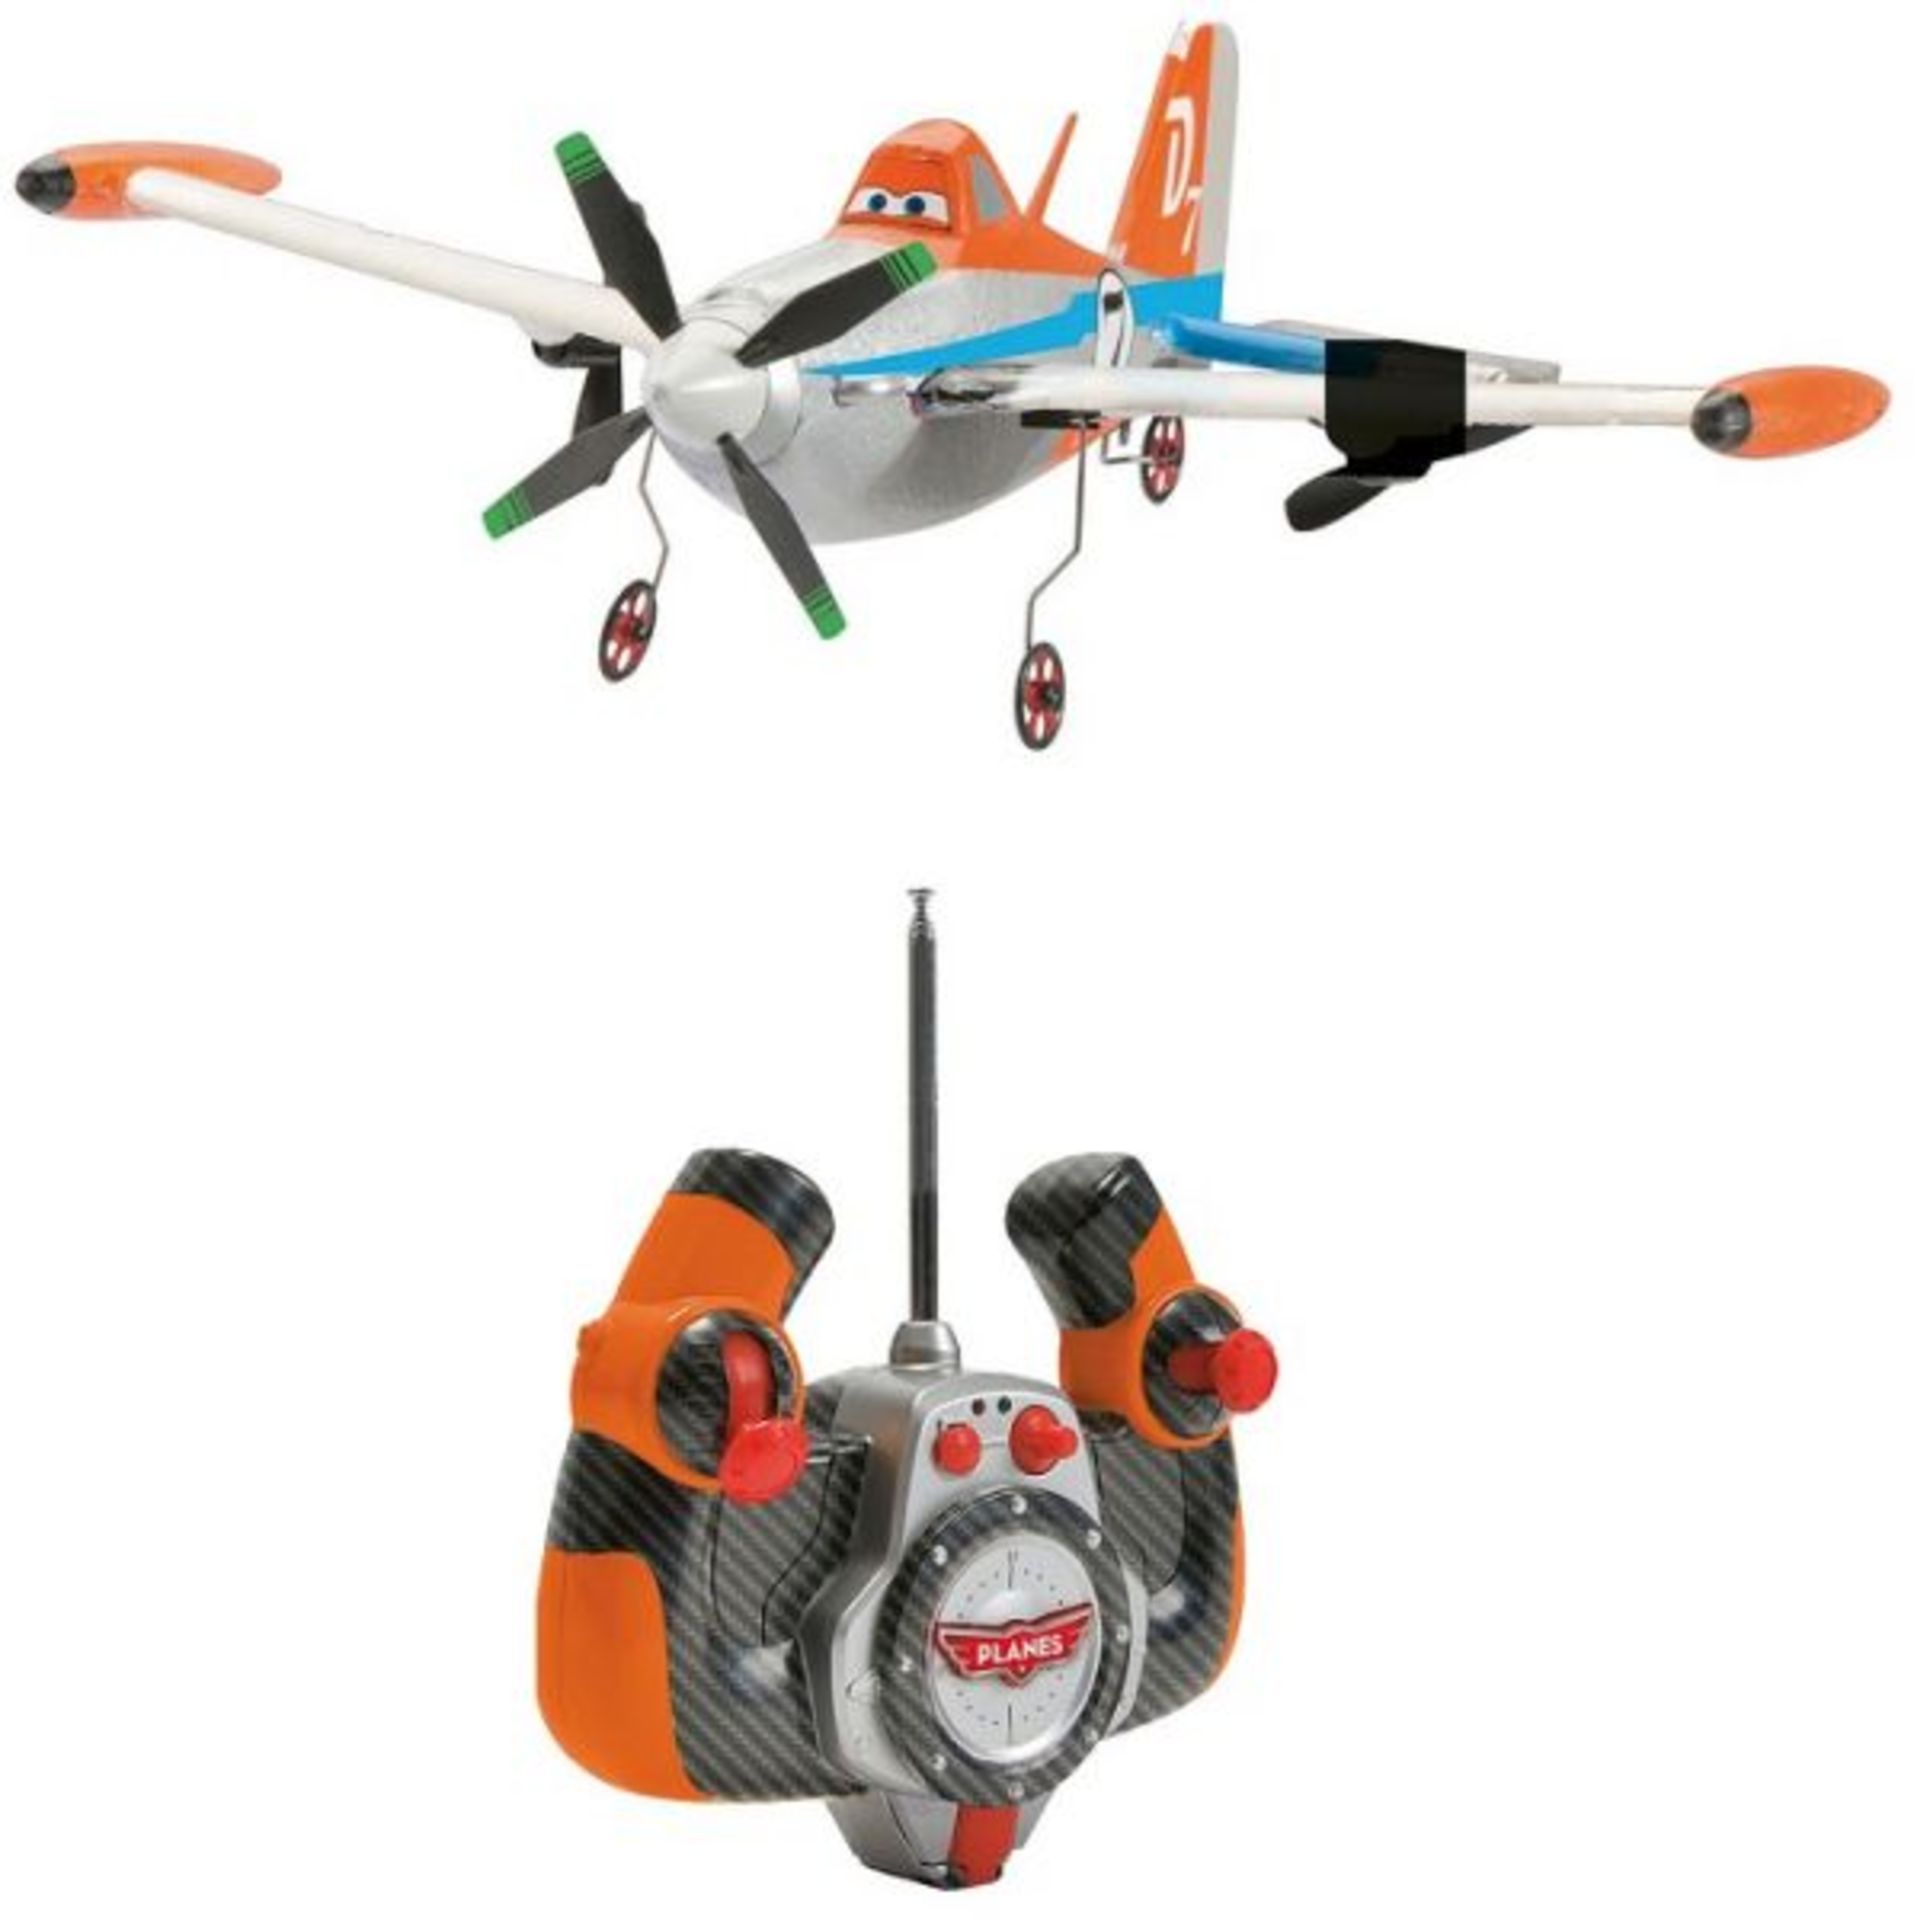 V Brand New Disney Planes Radio Control Flying Plane Dusty - 1:20 Scale - 45 Minutes Charging - 5-